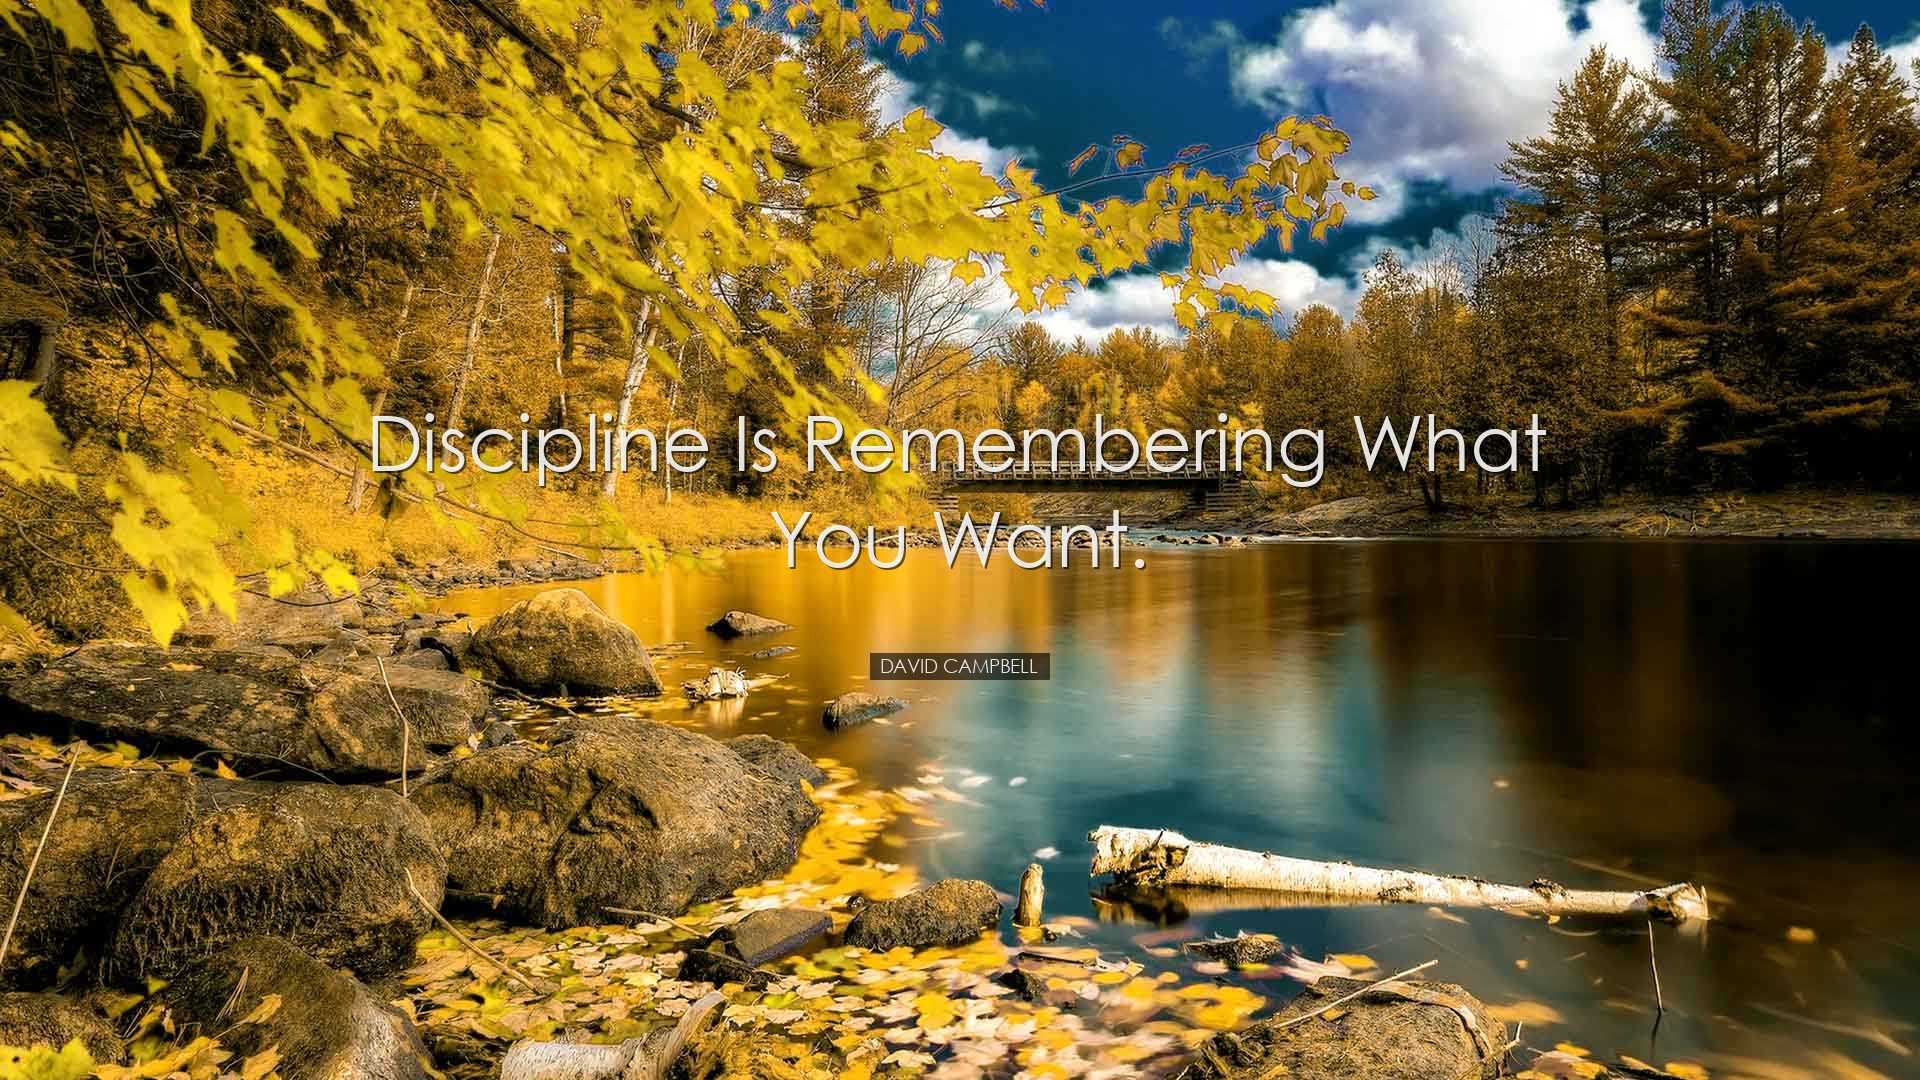 Discipline is remembering what you want. - David Campbell